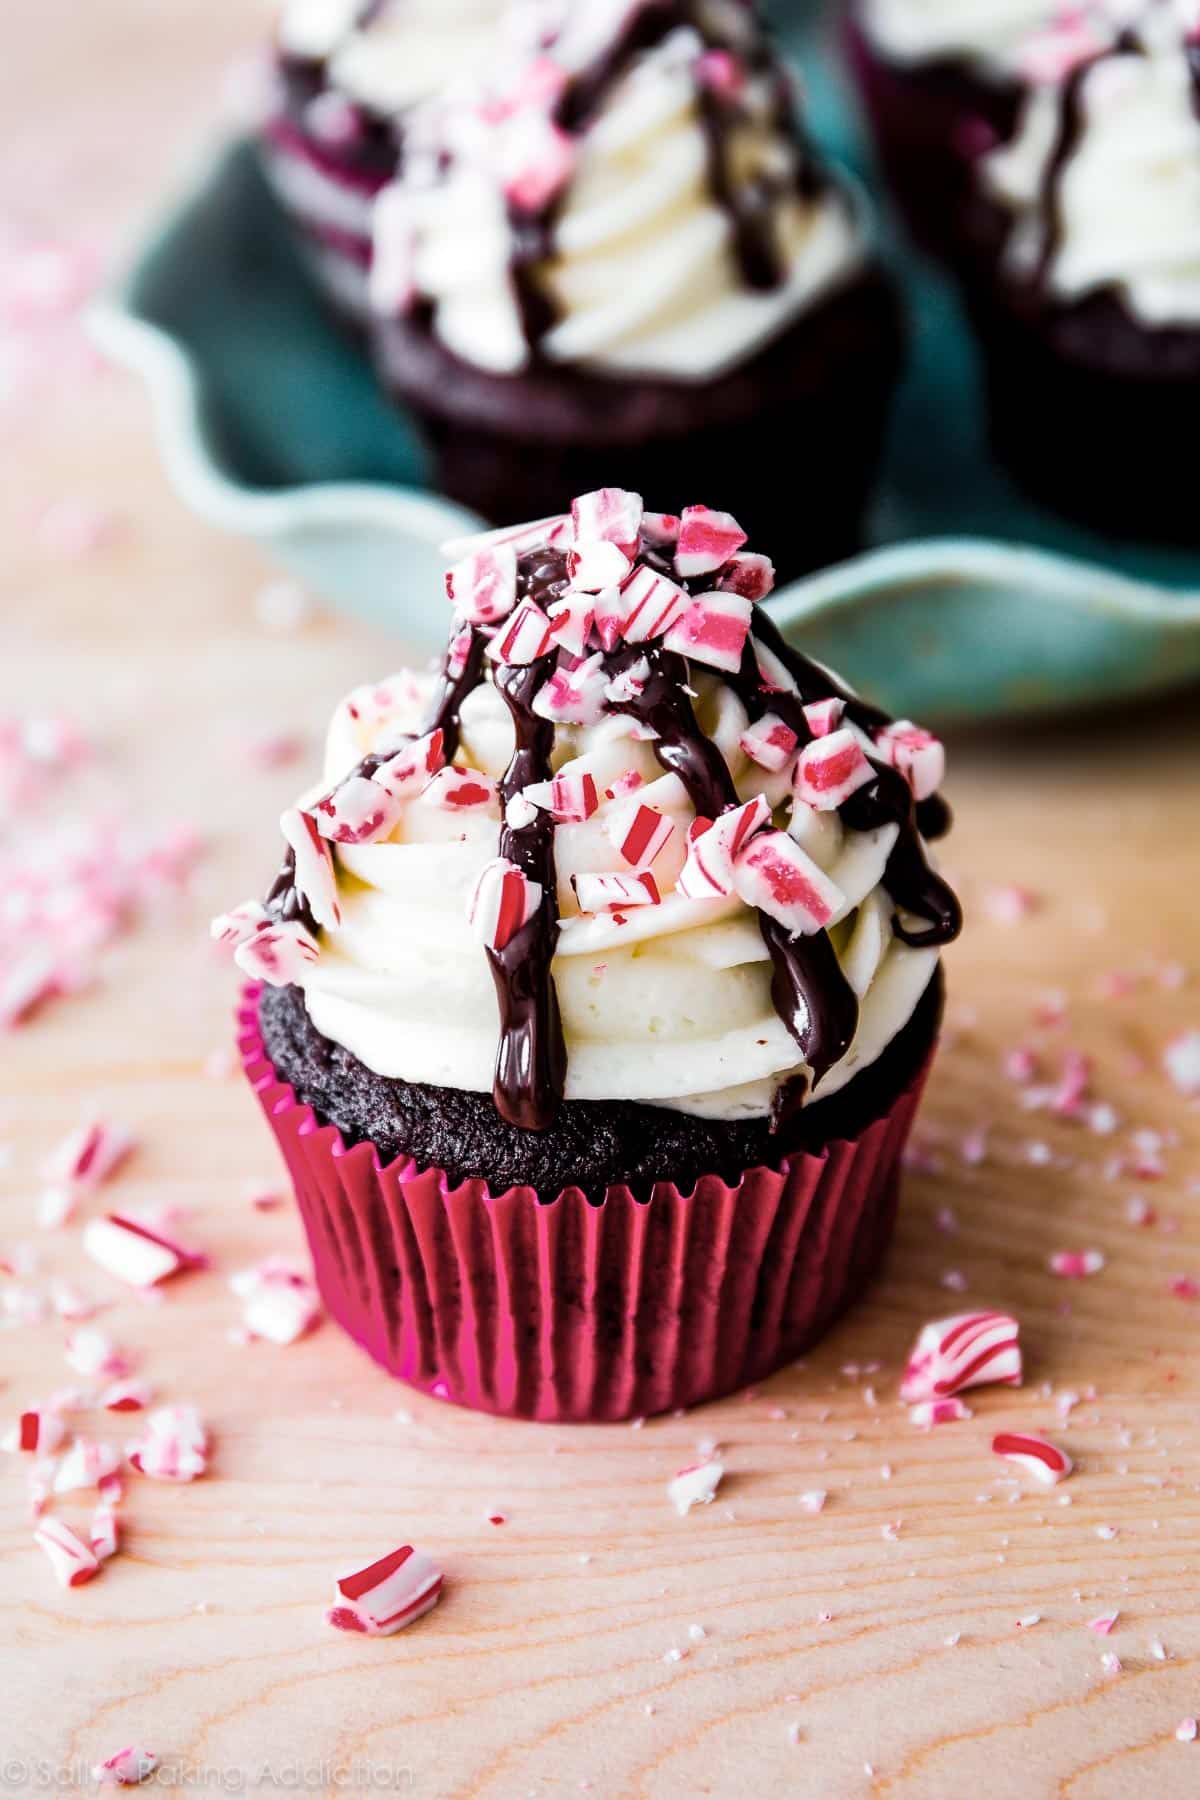 peppermint mocha cupcake with a chocolate drizzle and crushed candy canes